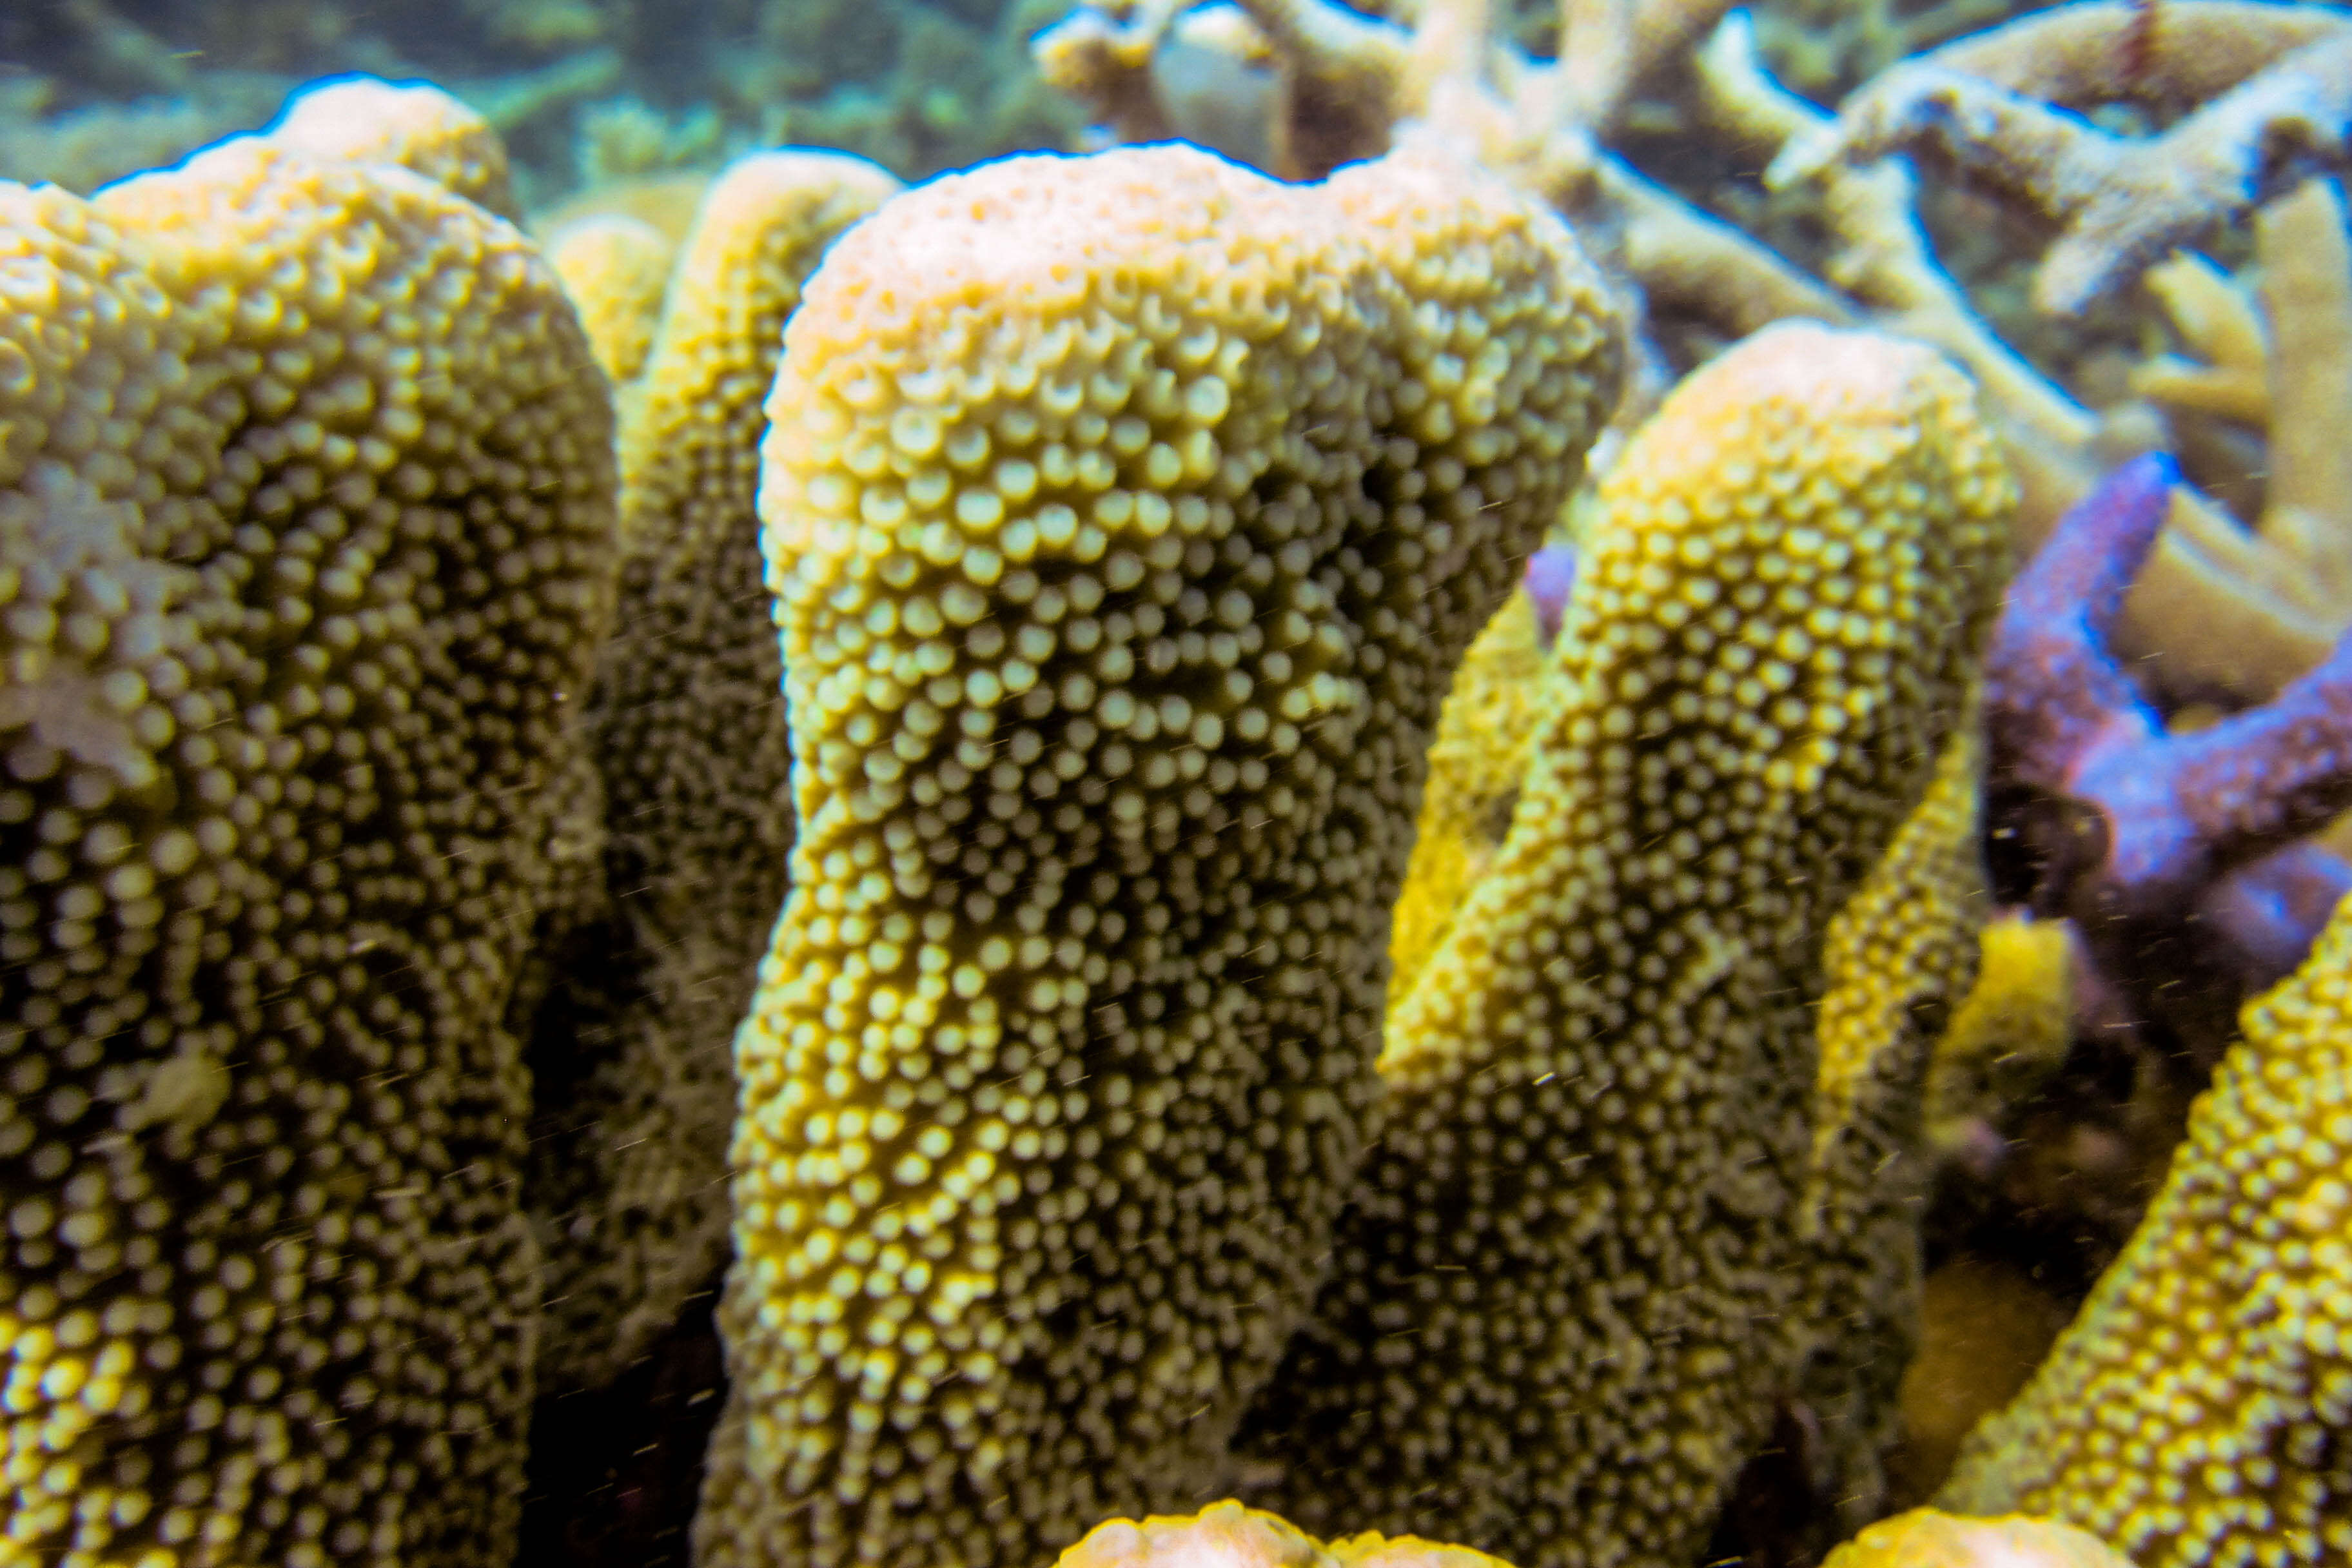 Image of Nuggety branching coral